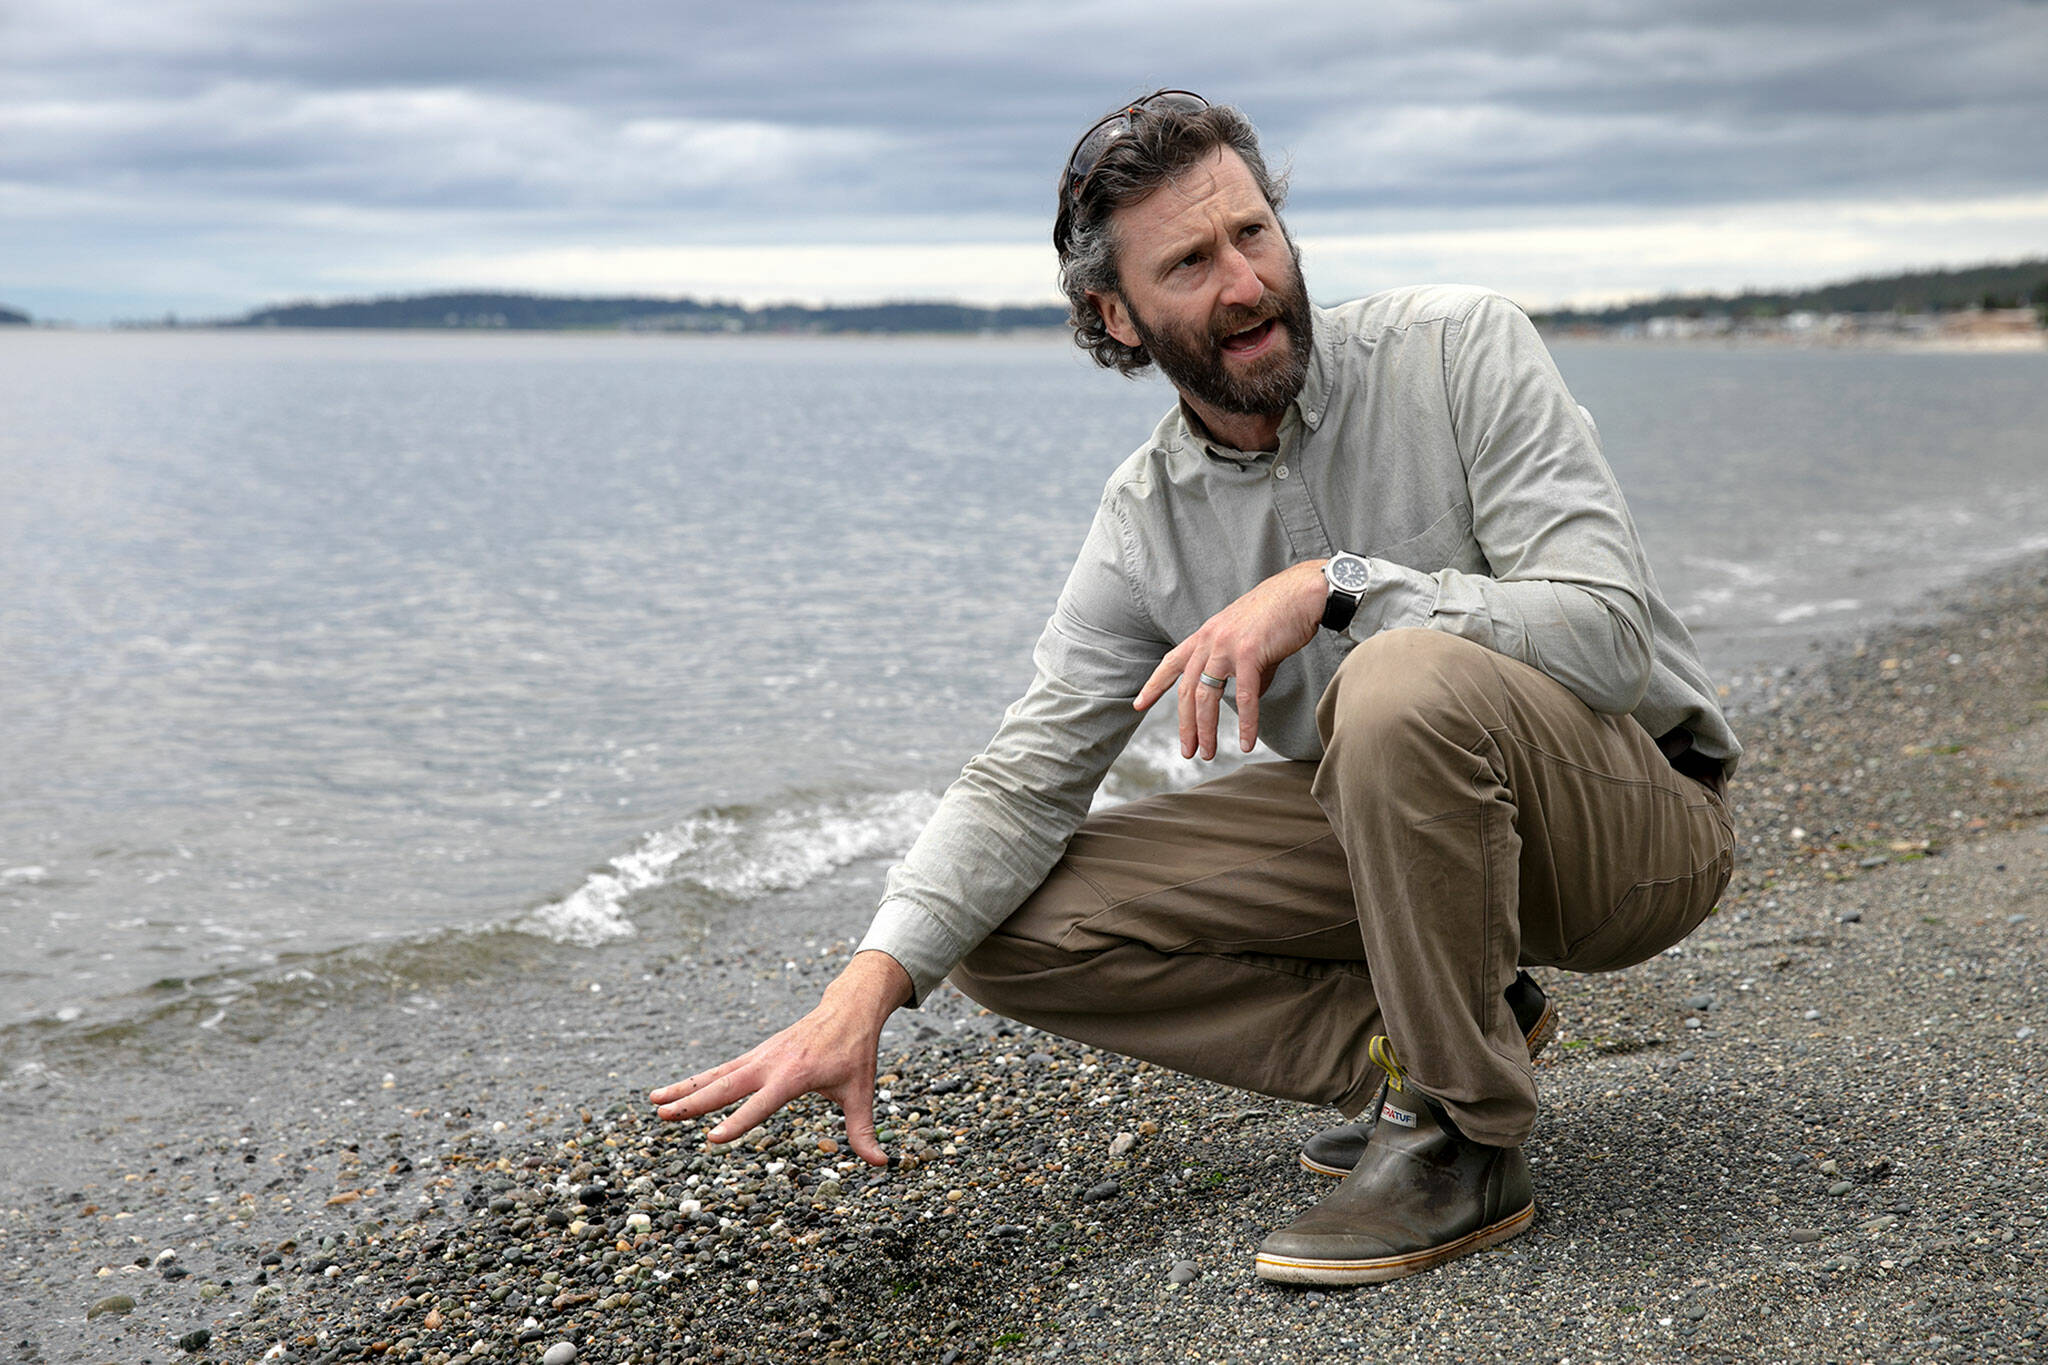 Ryan Elting, conservation director at the Whidbey Camano Land Trust, talks about the important ecosystem the shoreline provides on June 10 at the site of the Keystone Preserve near Coupeville. (Ryan Berry / The Herald)